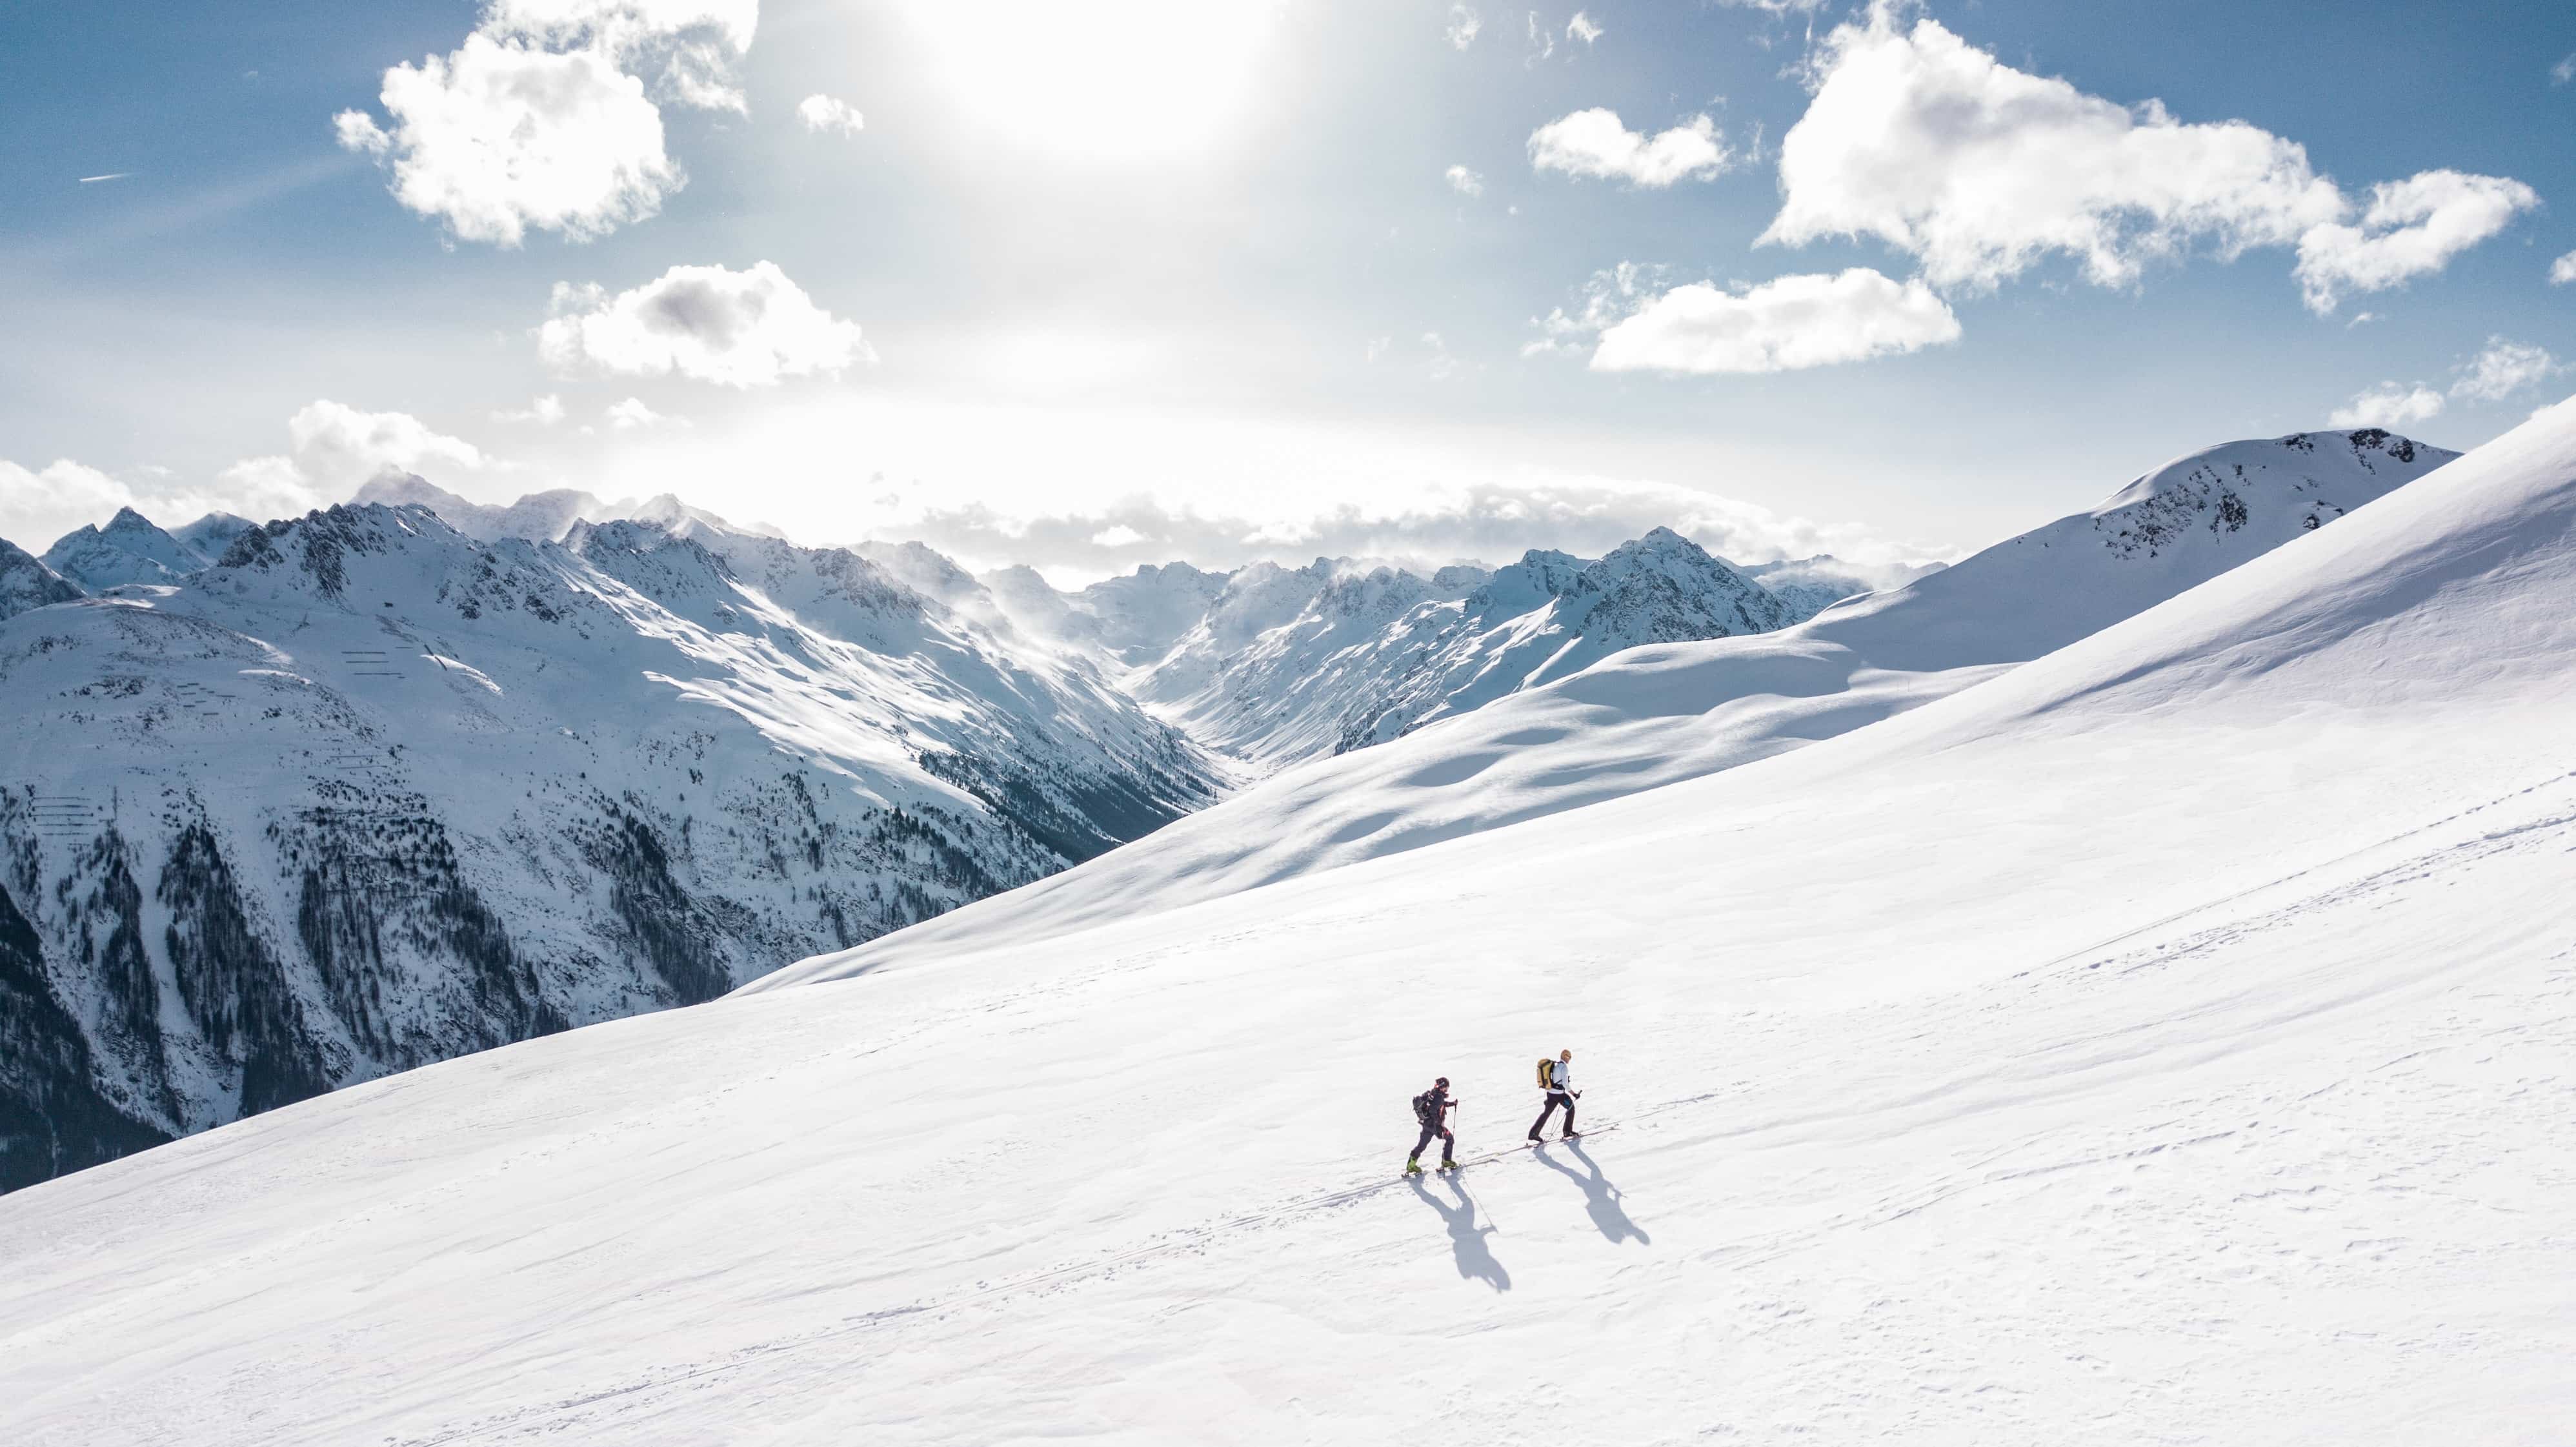 Two people ski mountaineering in the Alps